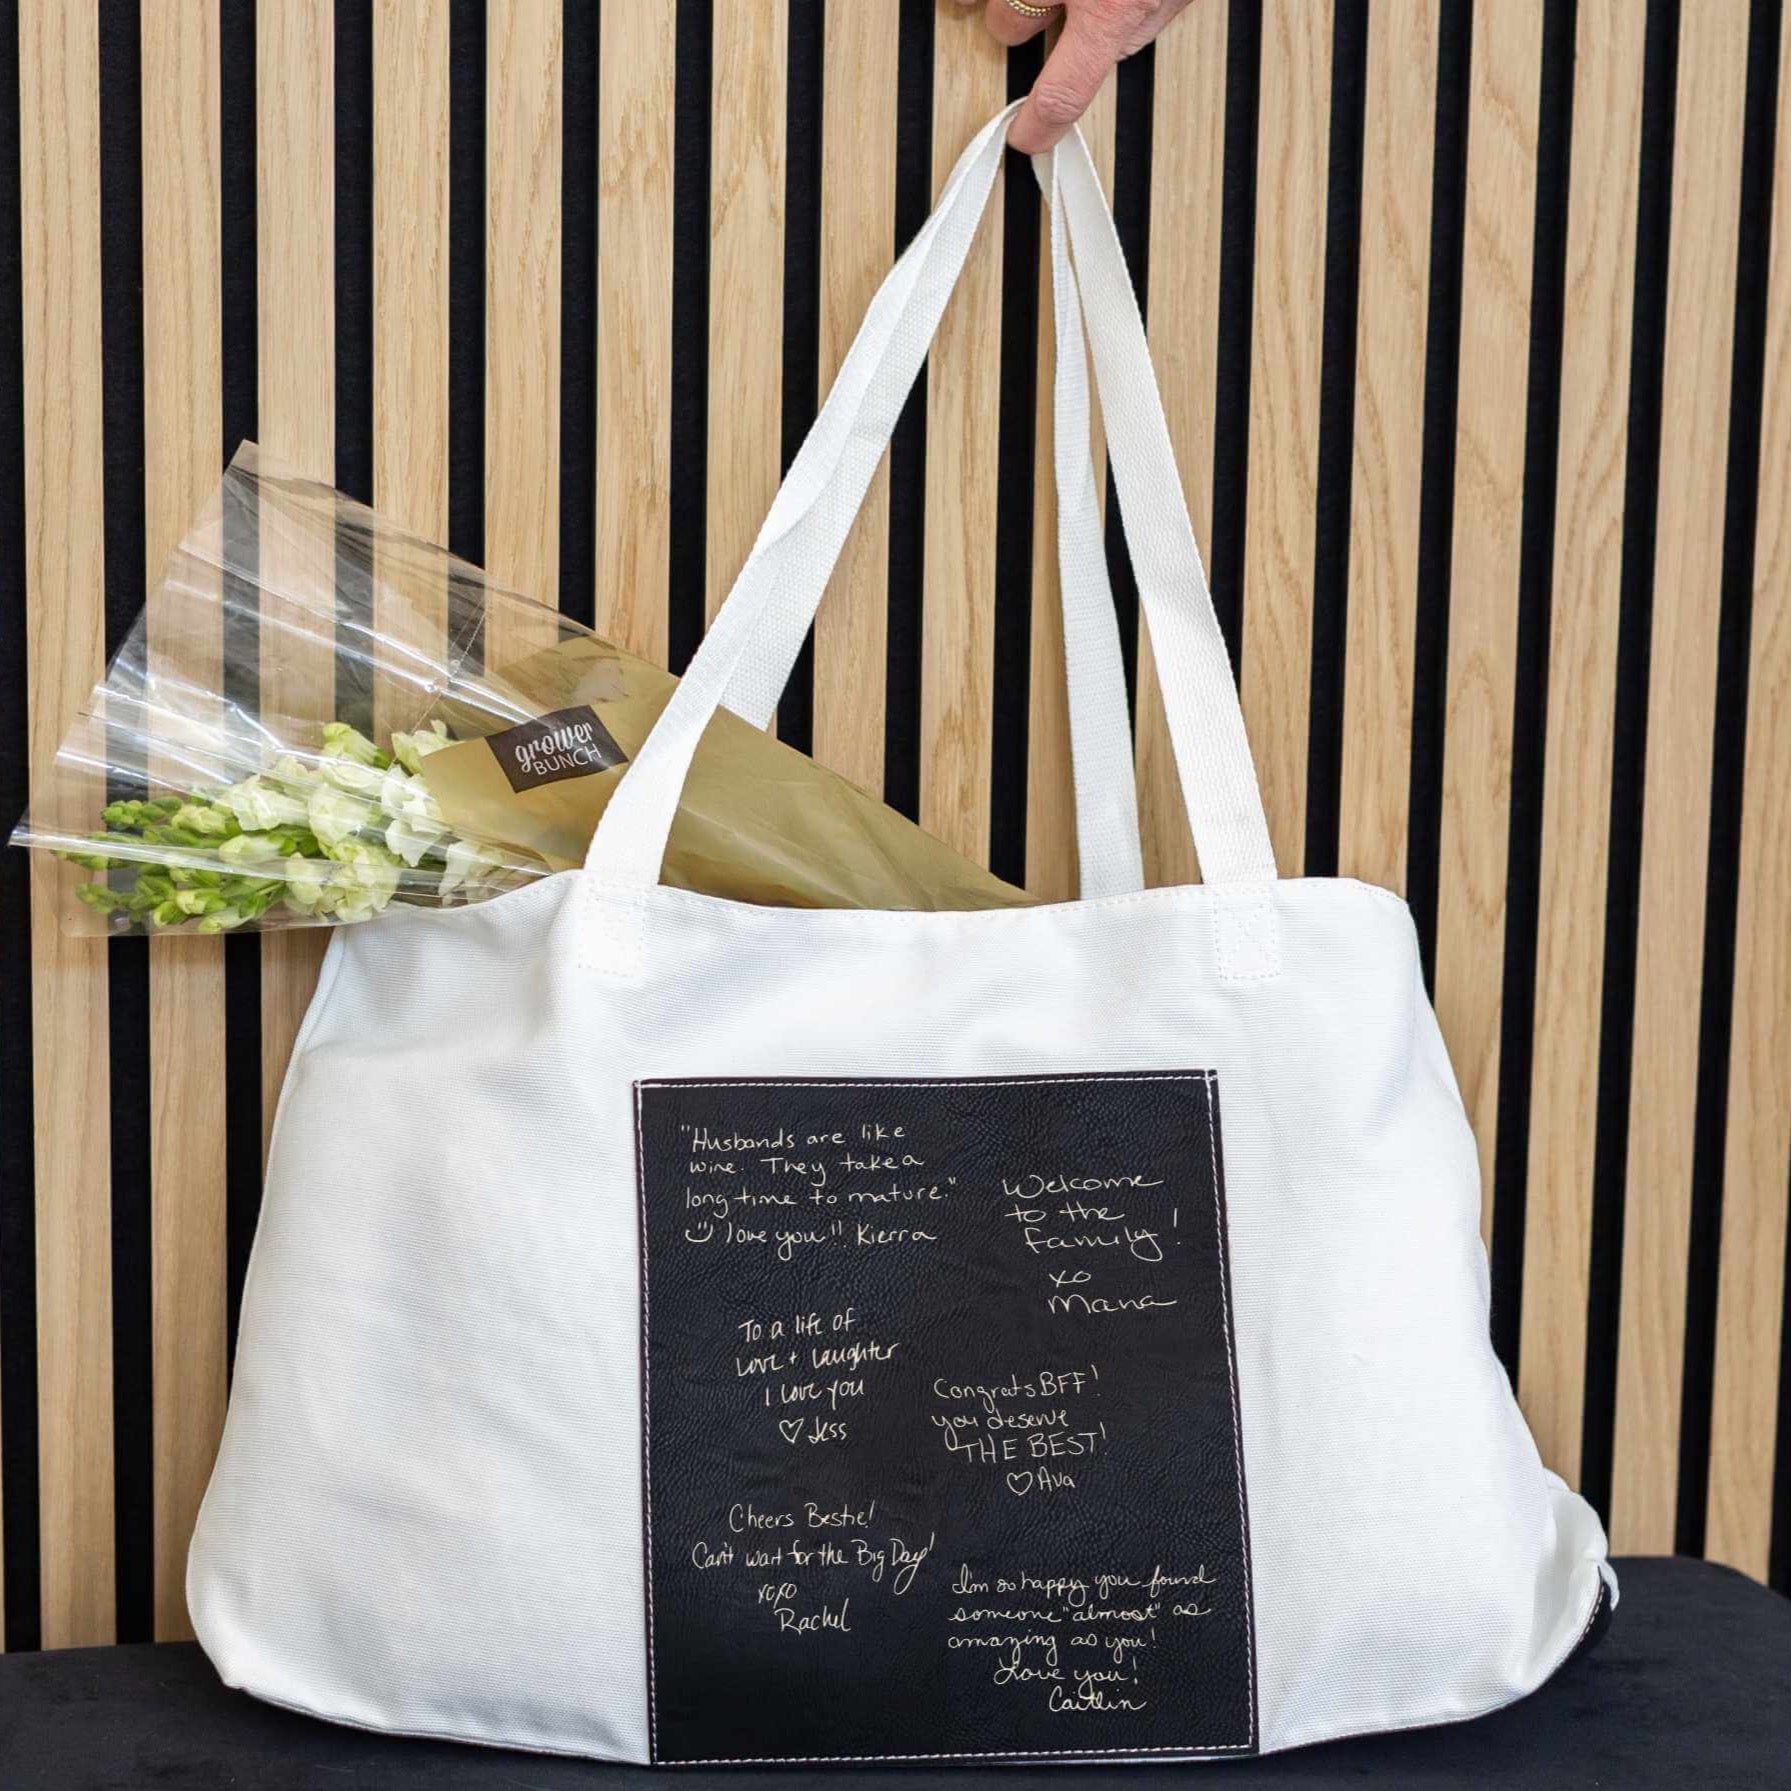 DELUXE Canvas and Leather Tote Bag Personalized with Handwritten Messages